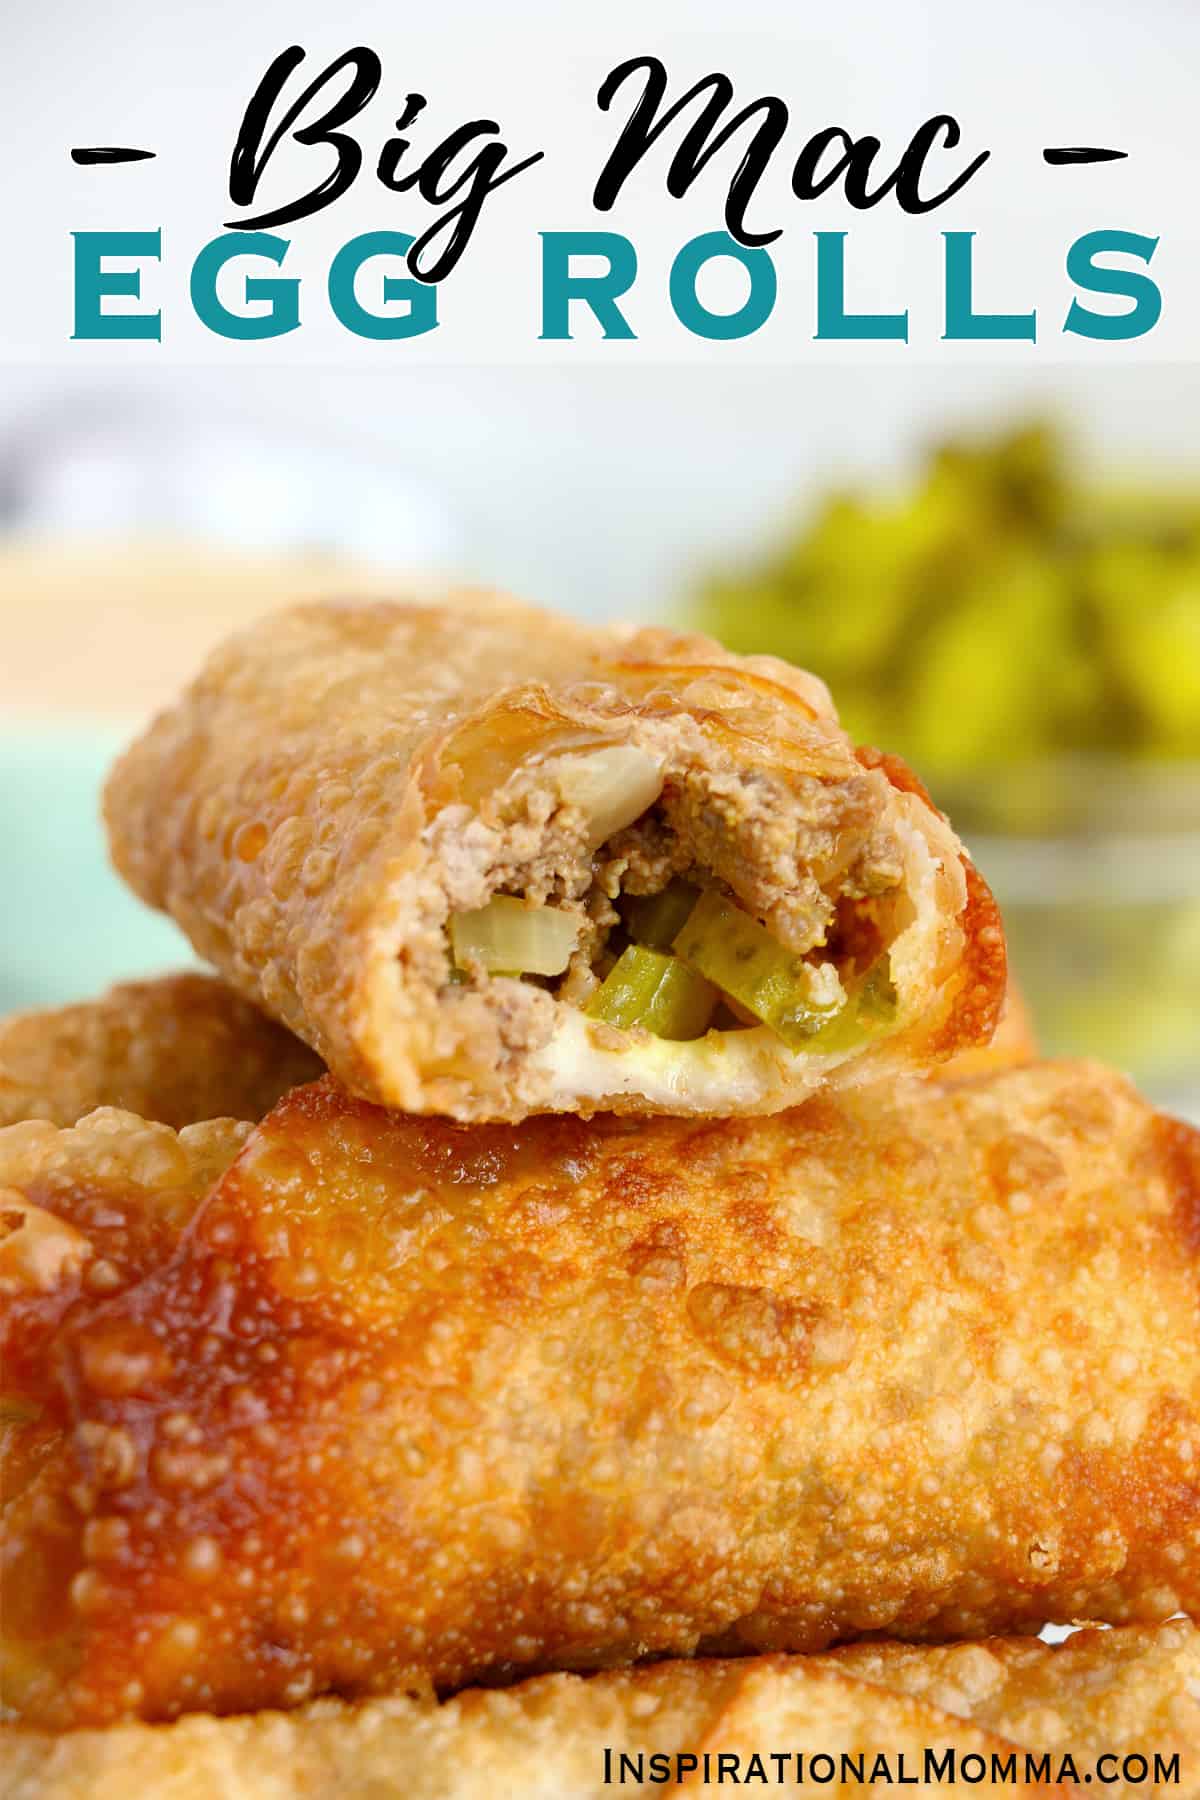 Stack of Big Mac egg rolls with bite taken out of top egg roll